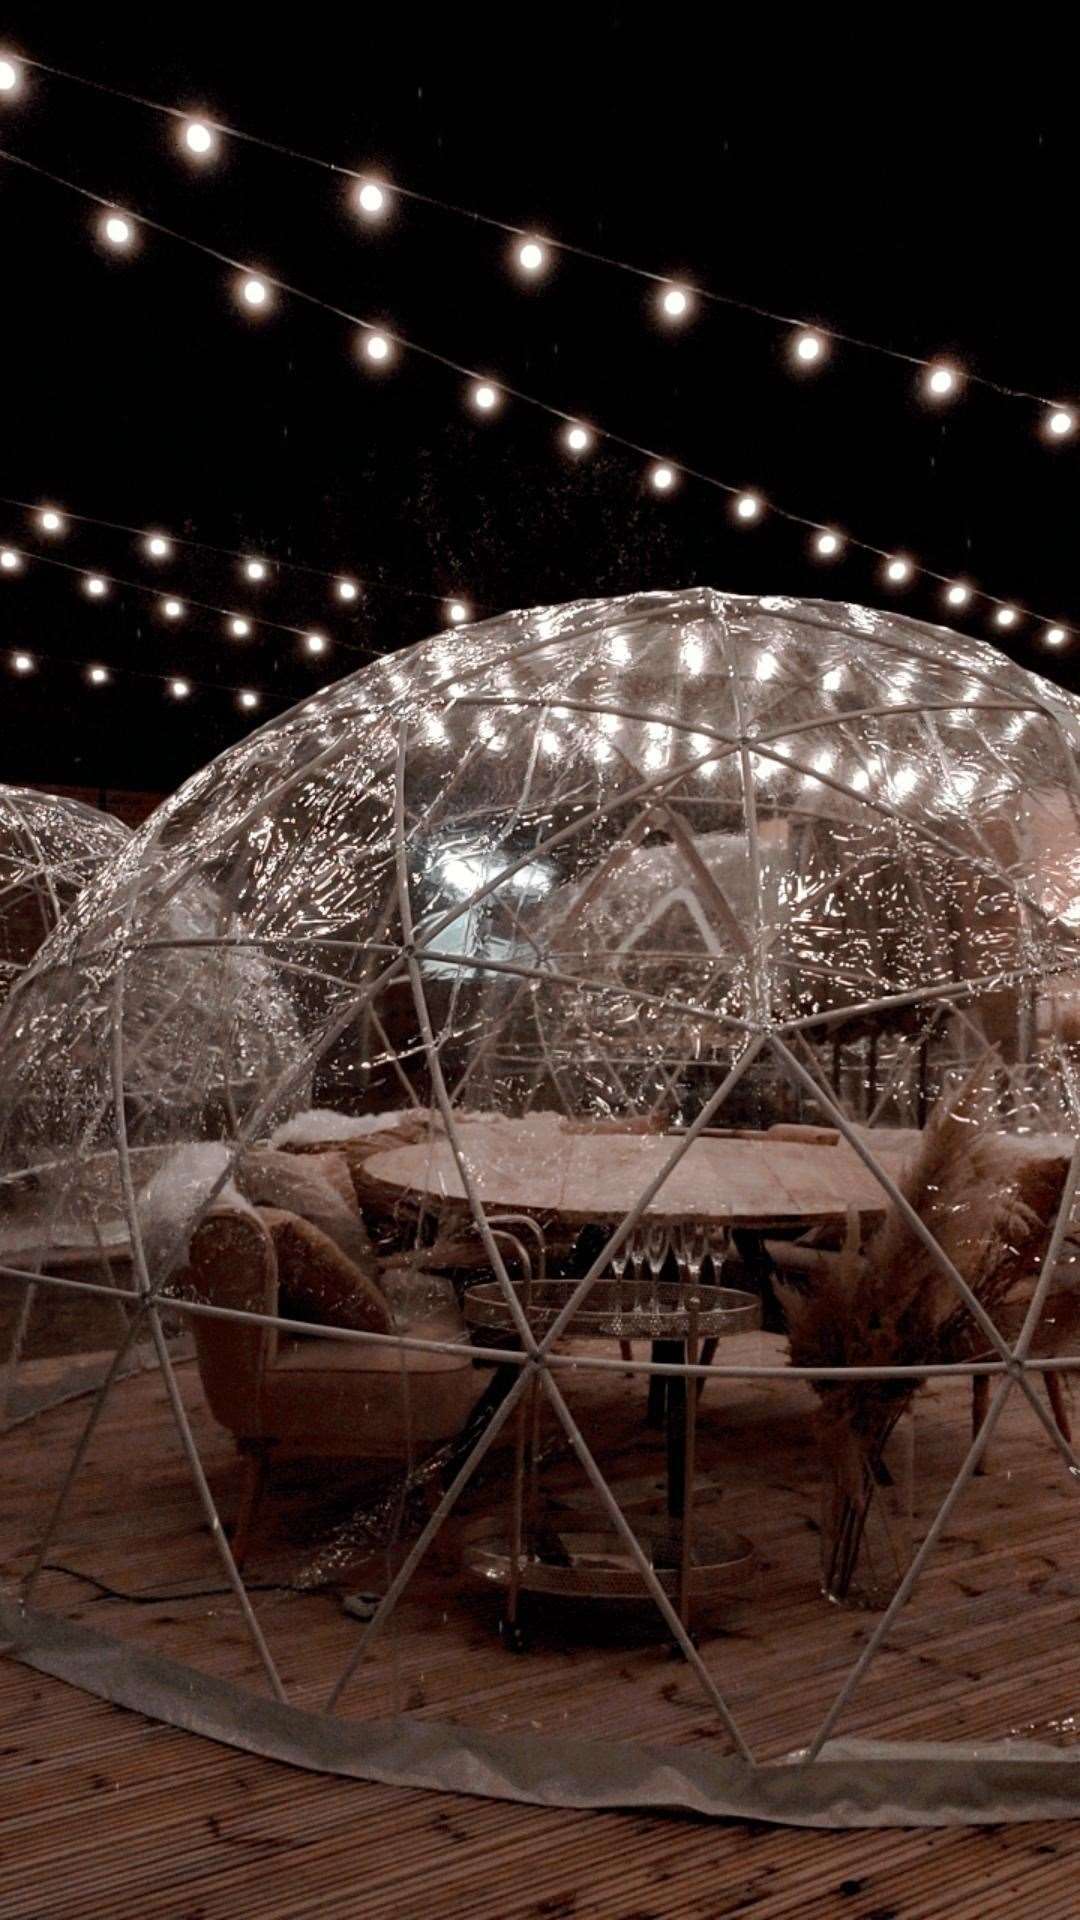 The four new igloos will be ready for customers at the Oad Street Food and Crafts restaurant later this month